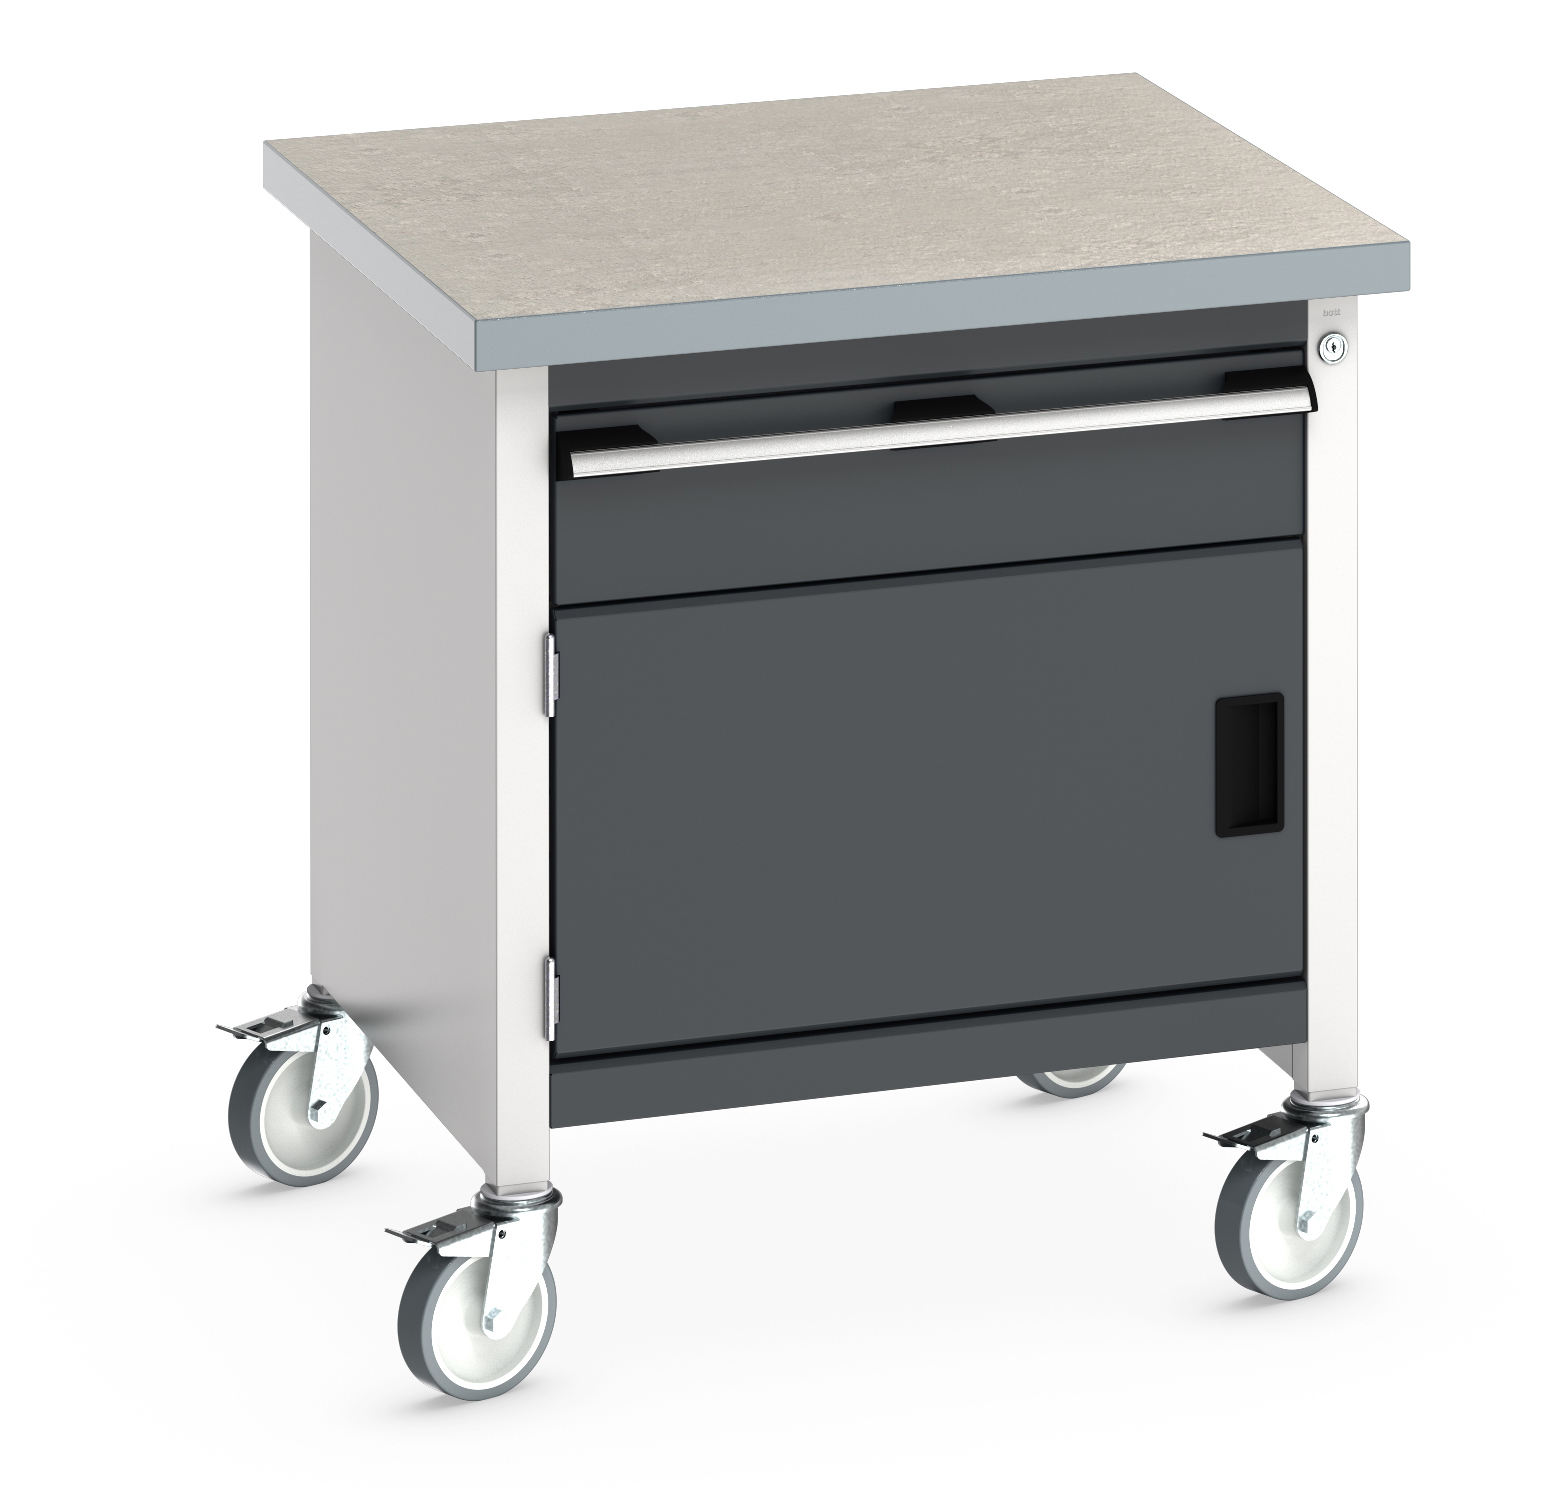 Bott Cubio Mobile Storage Bench With 1 Drawer - Full Cupboard - 41002090.19V